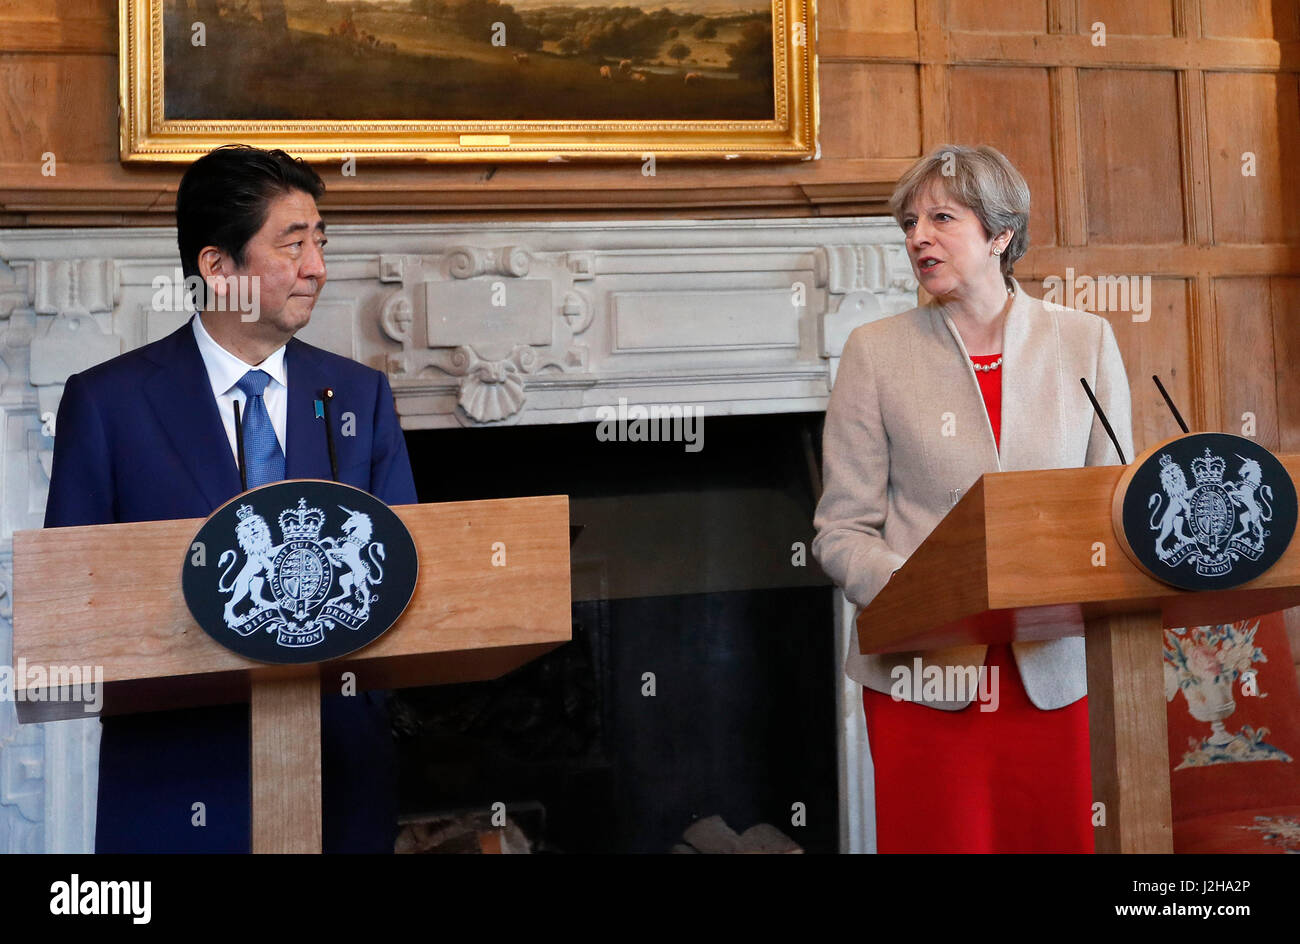 Prime Minister Theresa May speaks during a joint press conference with Japan's Prime Minister Shinzo Abe after their meeting at Chequers. Stock Photo